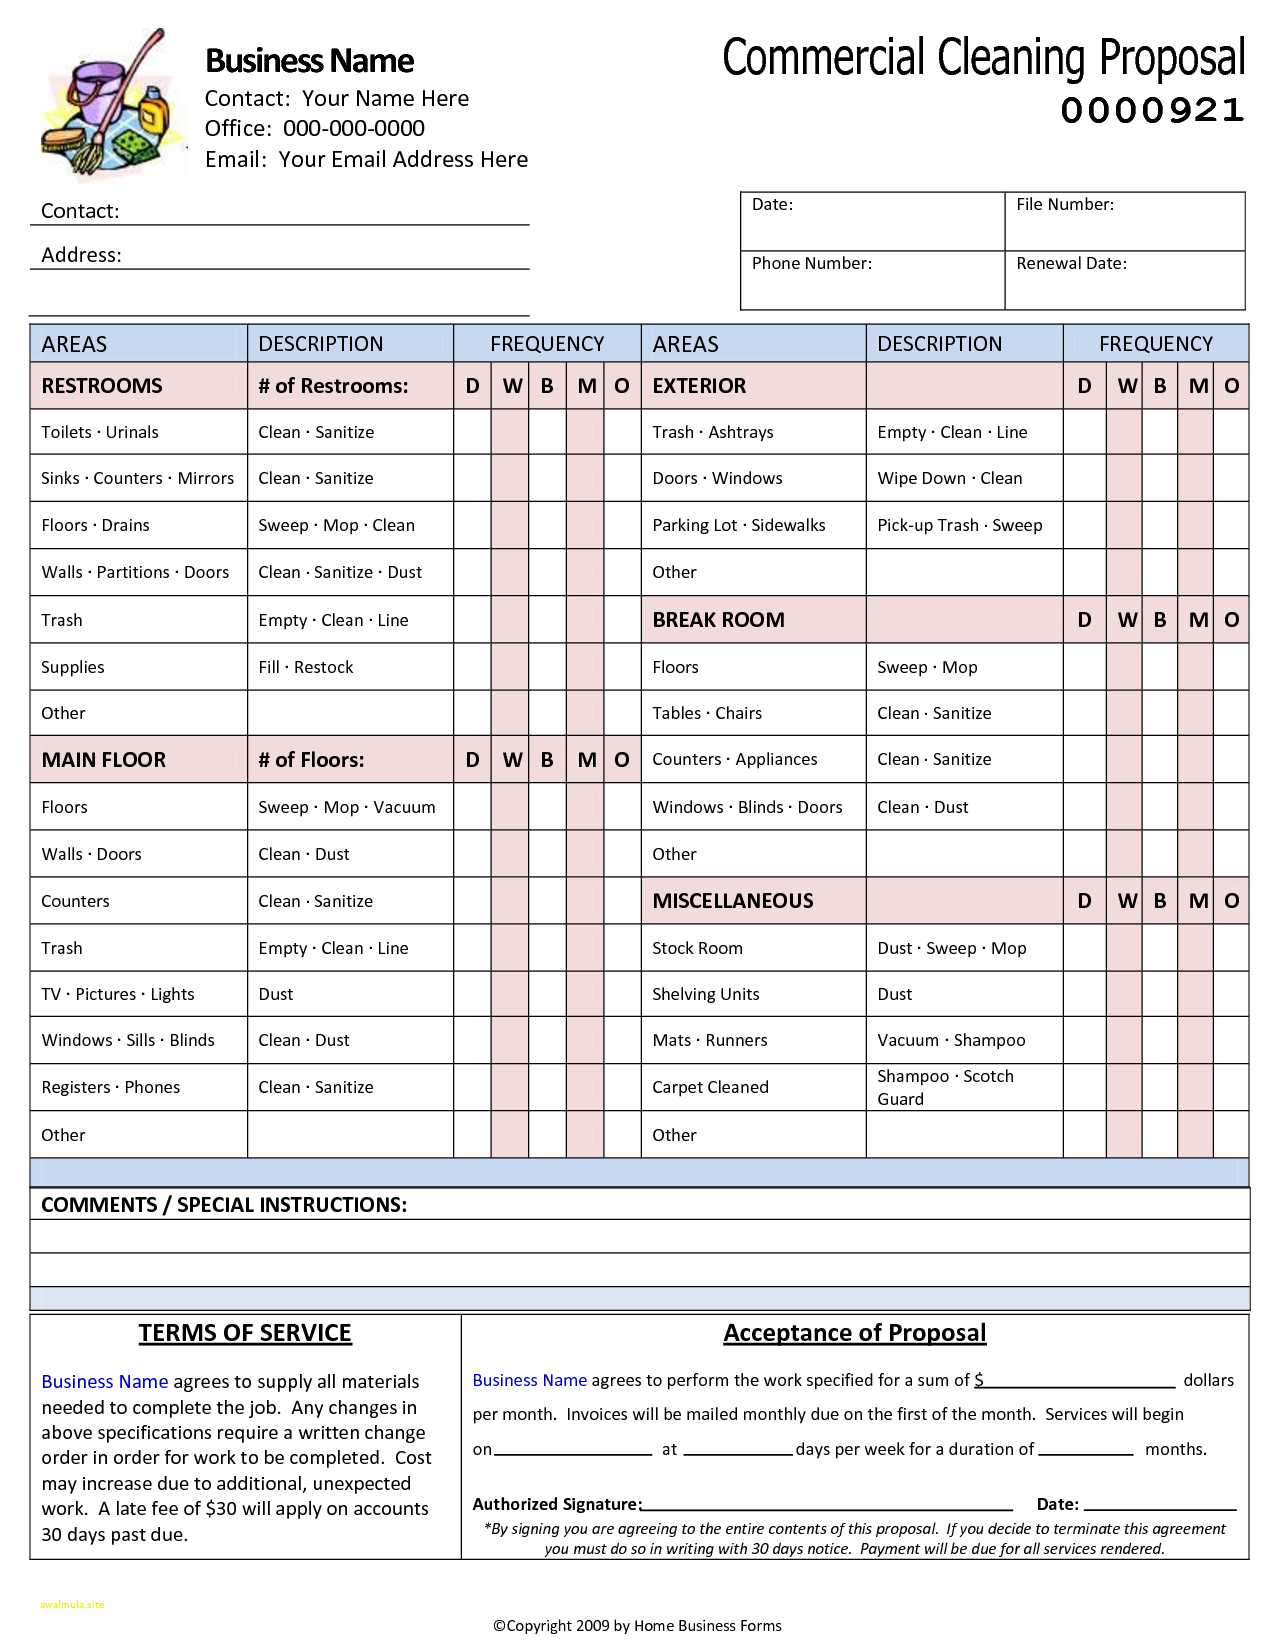 Pricing Spreadsheet For House Cleaning Pricing Spreadsheet  Awal Mula